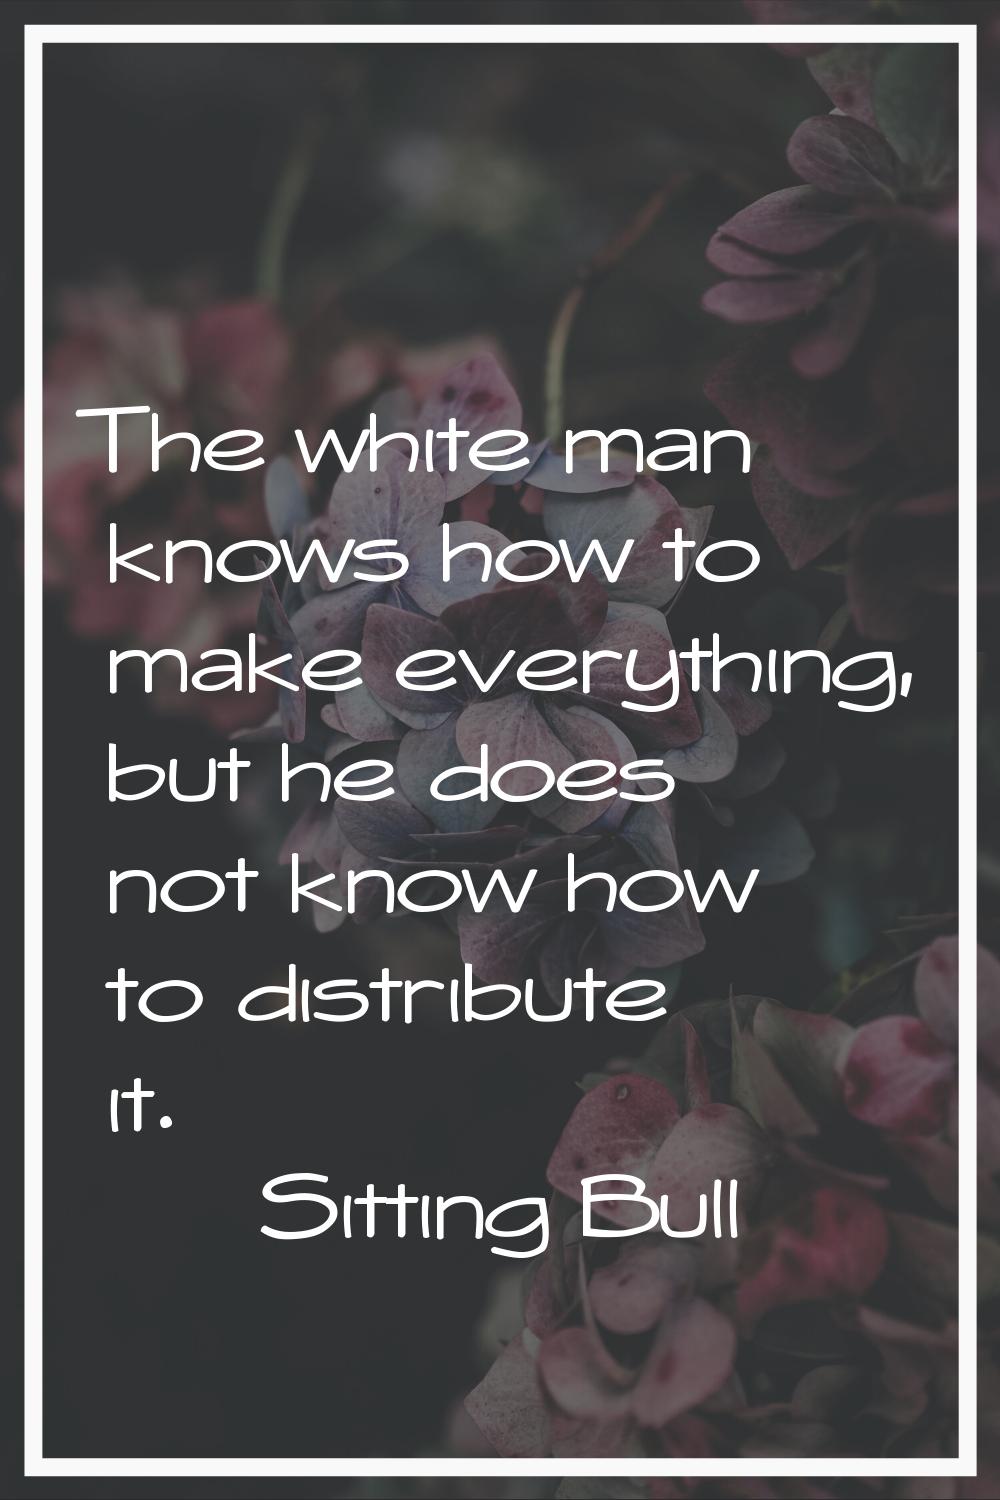 The white man knows how to make everything, but he does not know how to distribute it.